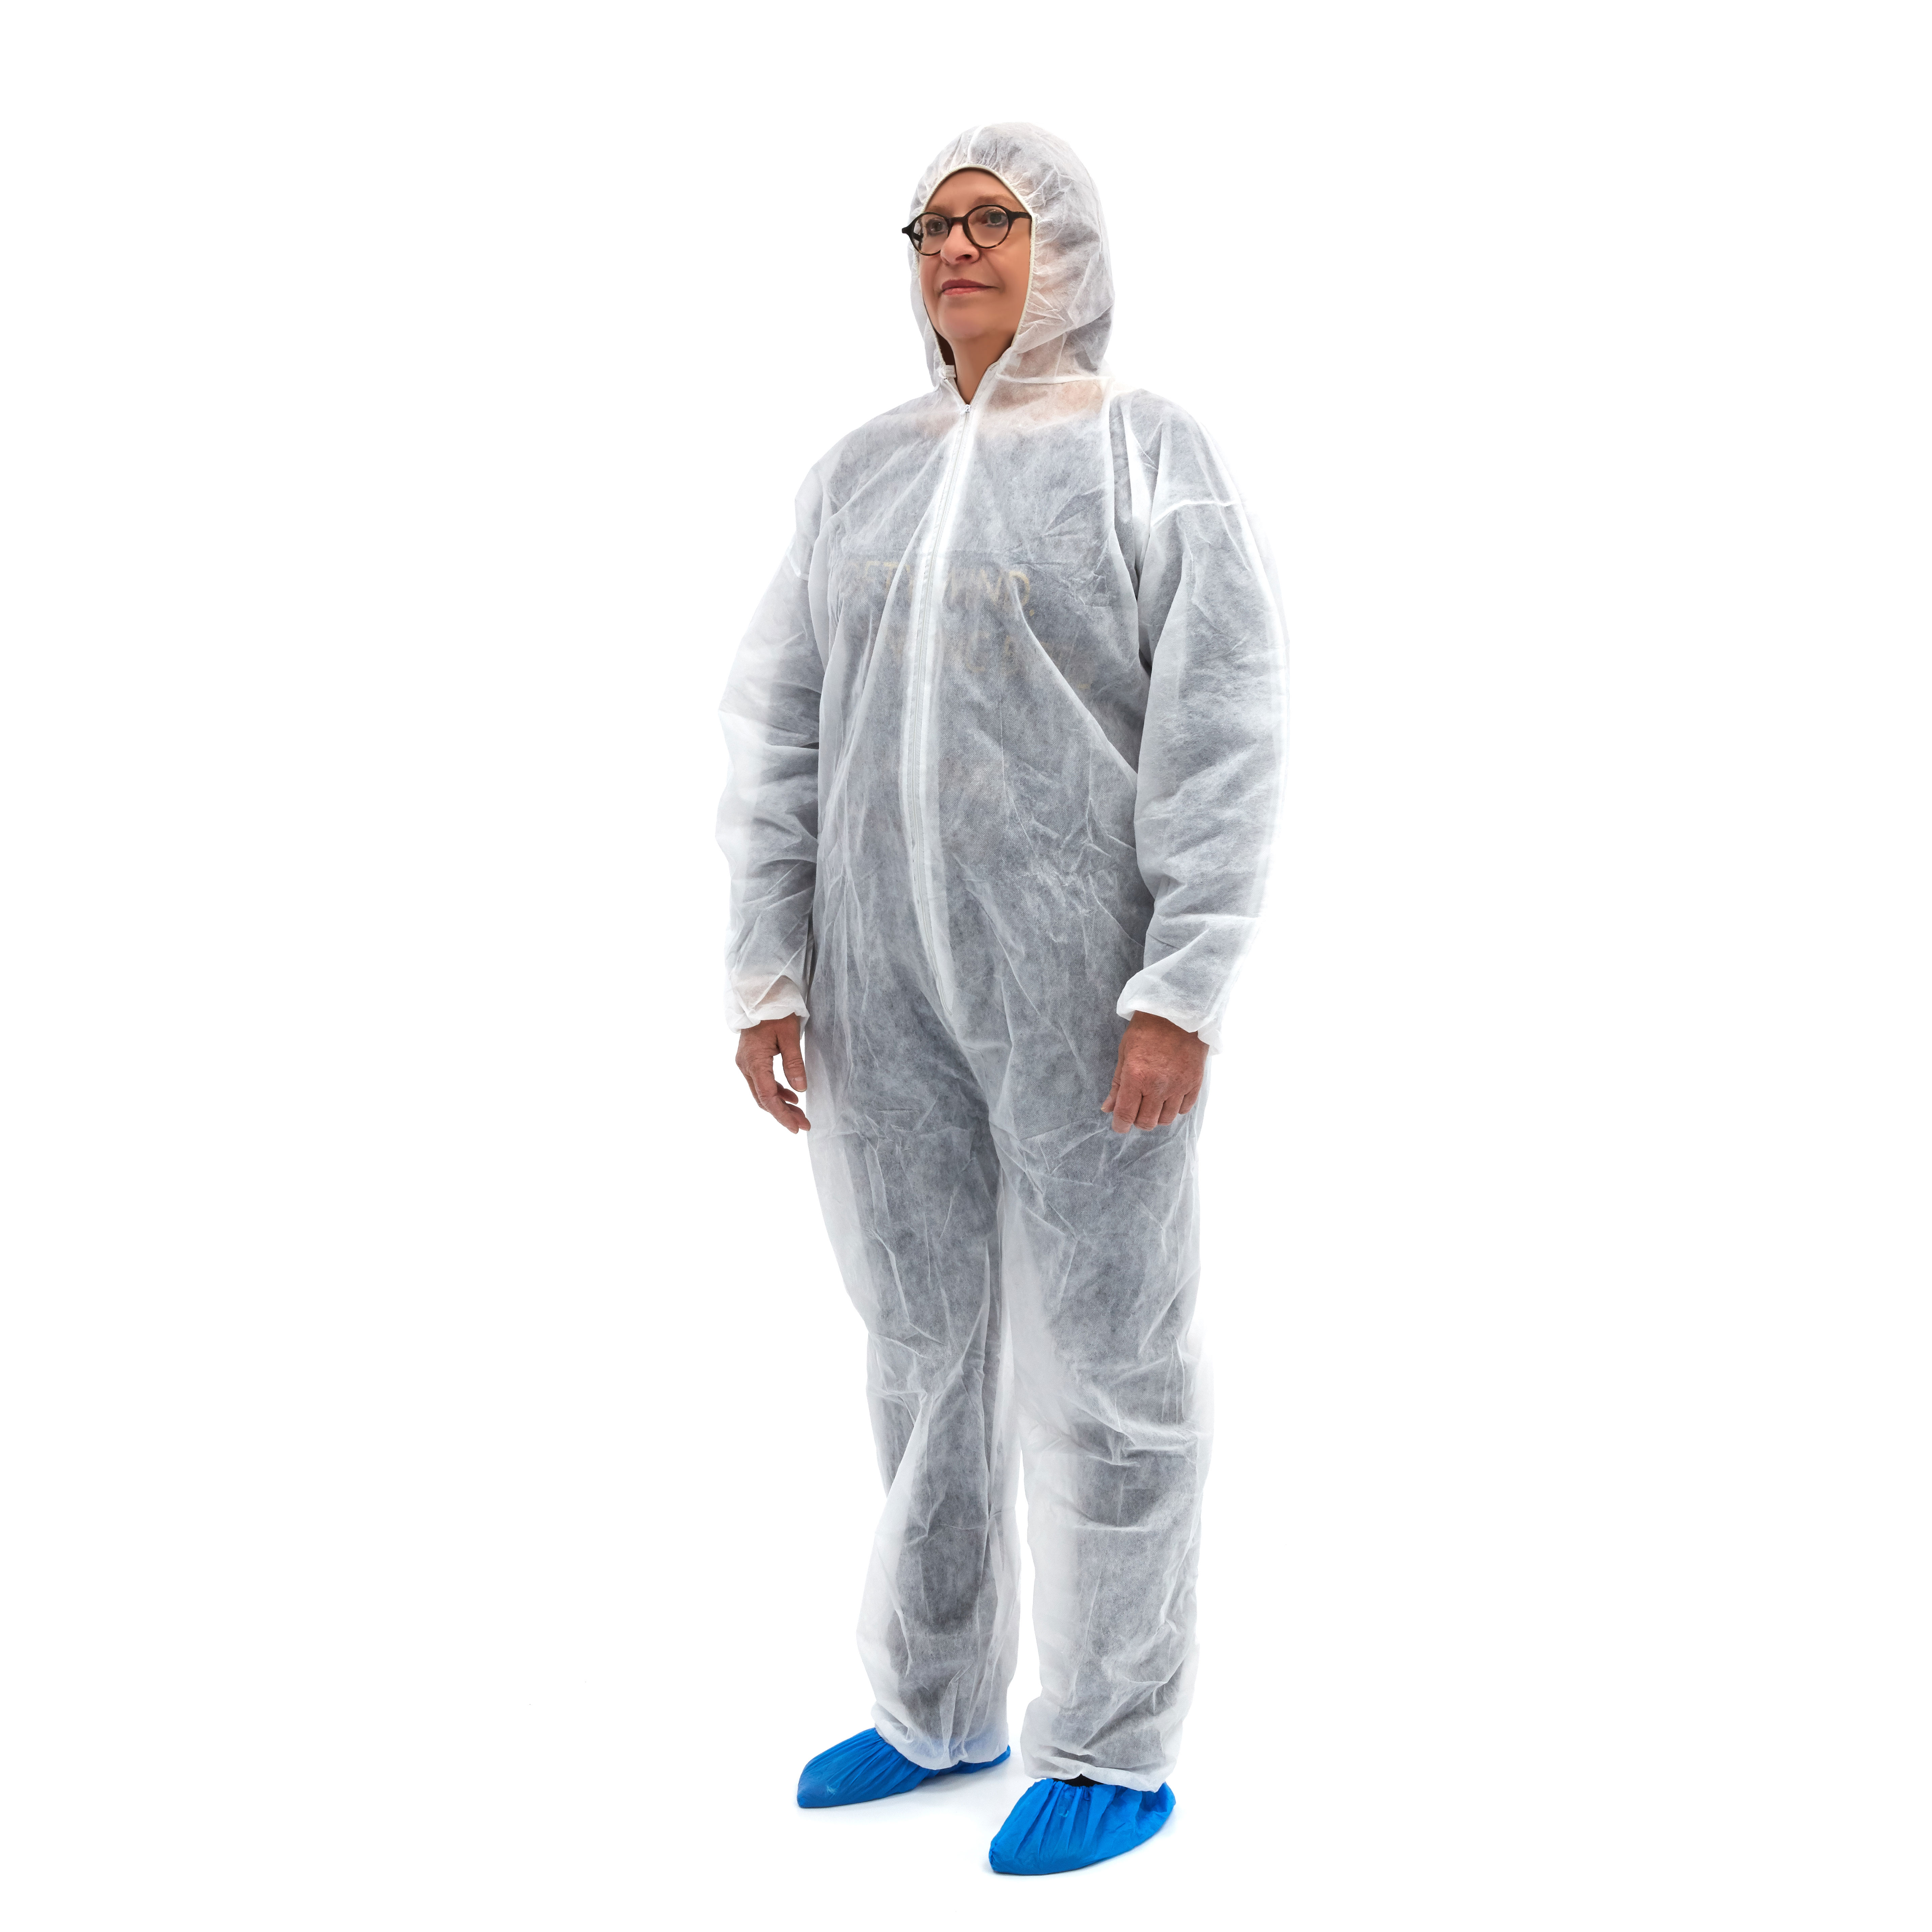 OVE-L Romed overalls, waisted, with capuchin, size large, white, non sterile, non-woven, per piece in a polybag, 50 pcs in a carton.